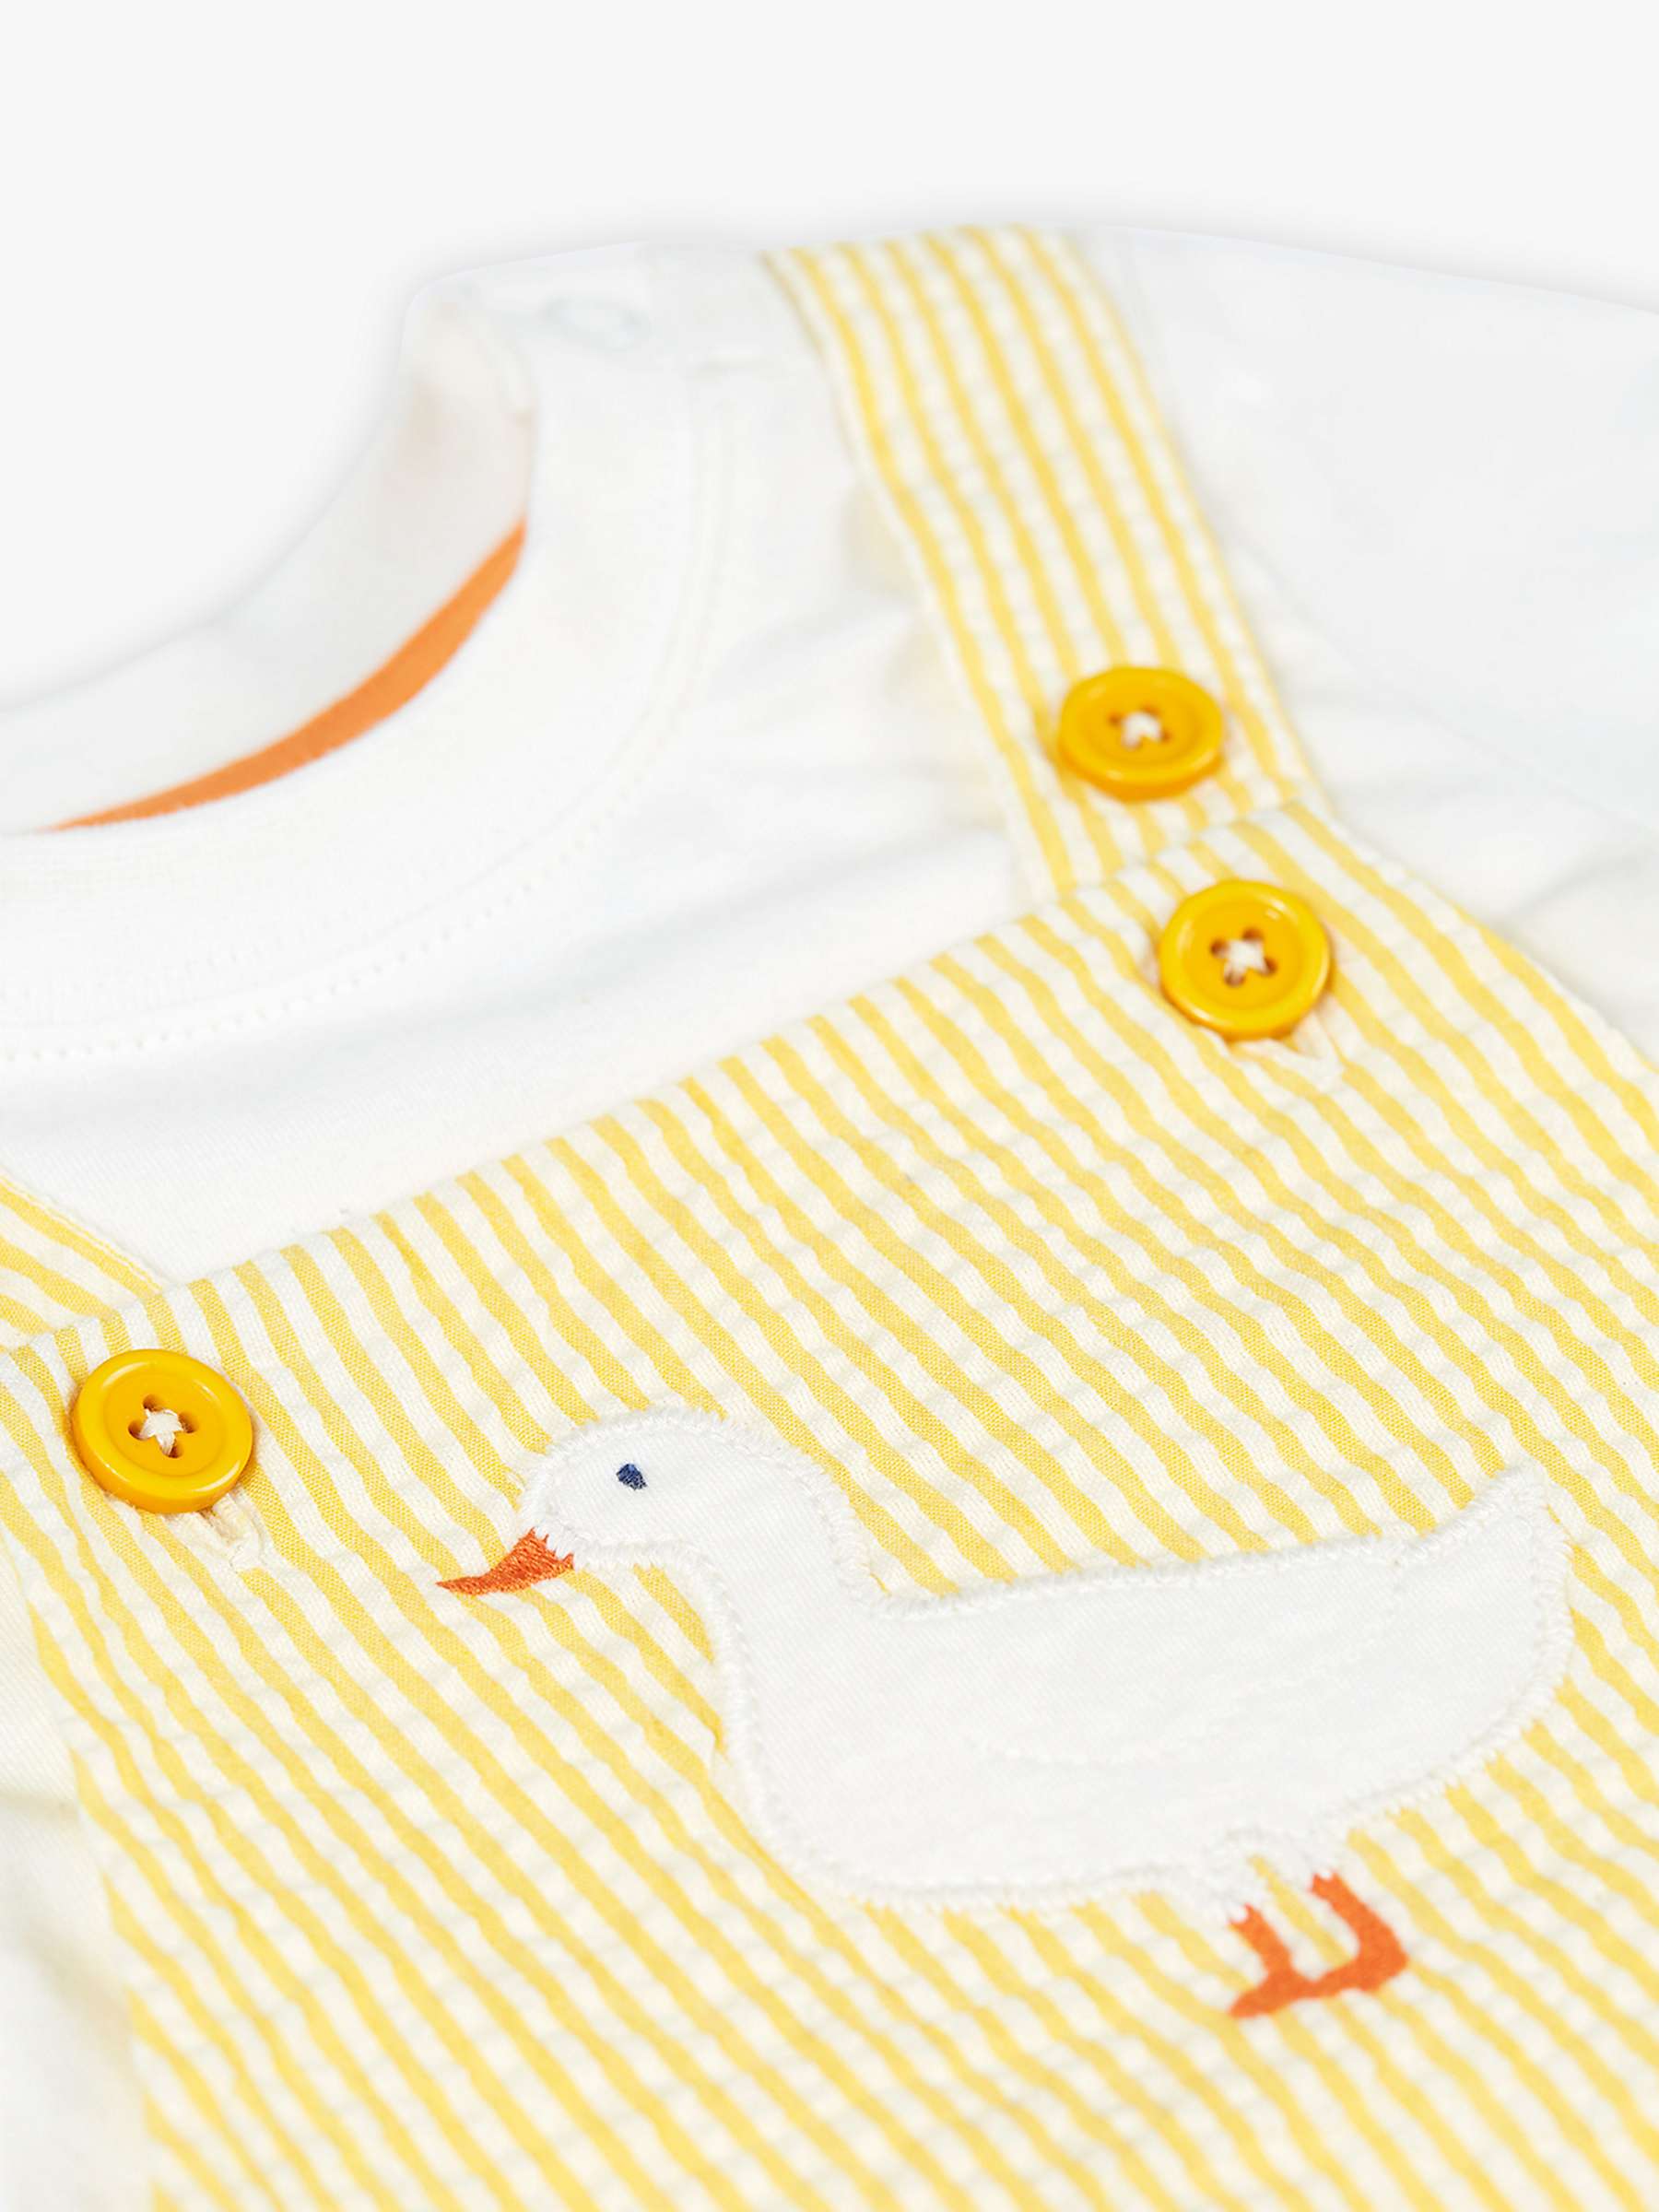 Buy Frugi Baby Godrevy Organic Cotton Duck Applique Dungaree Outfit, Dandelion/White Online at johnlewis.com